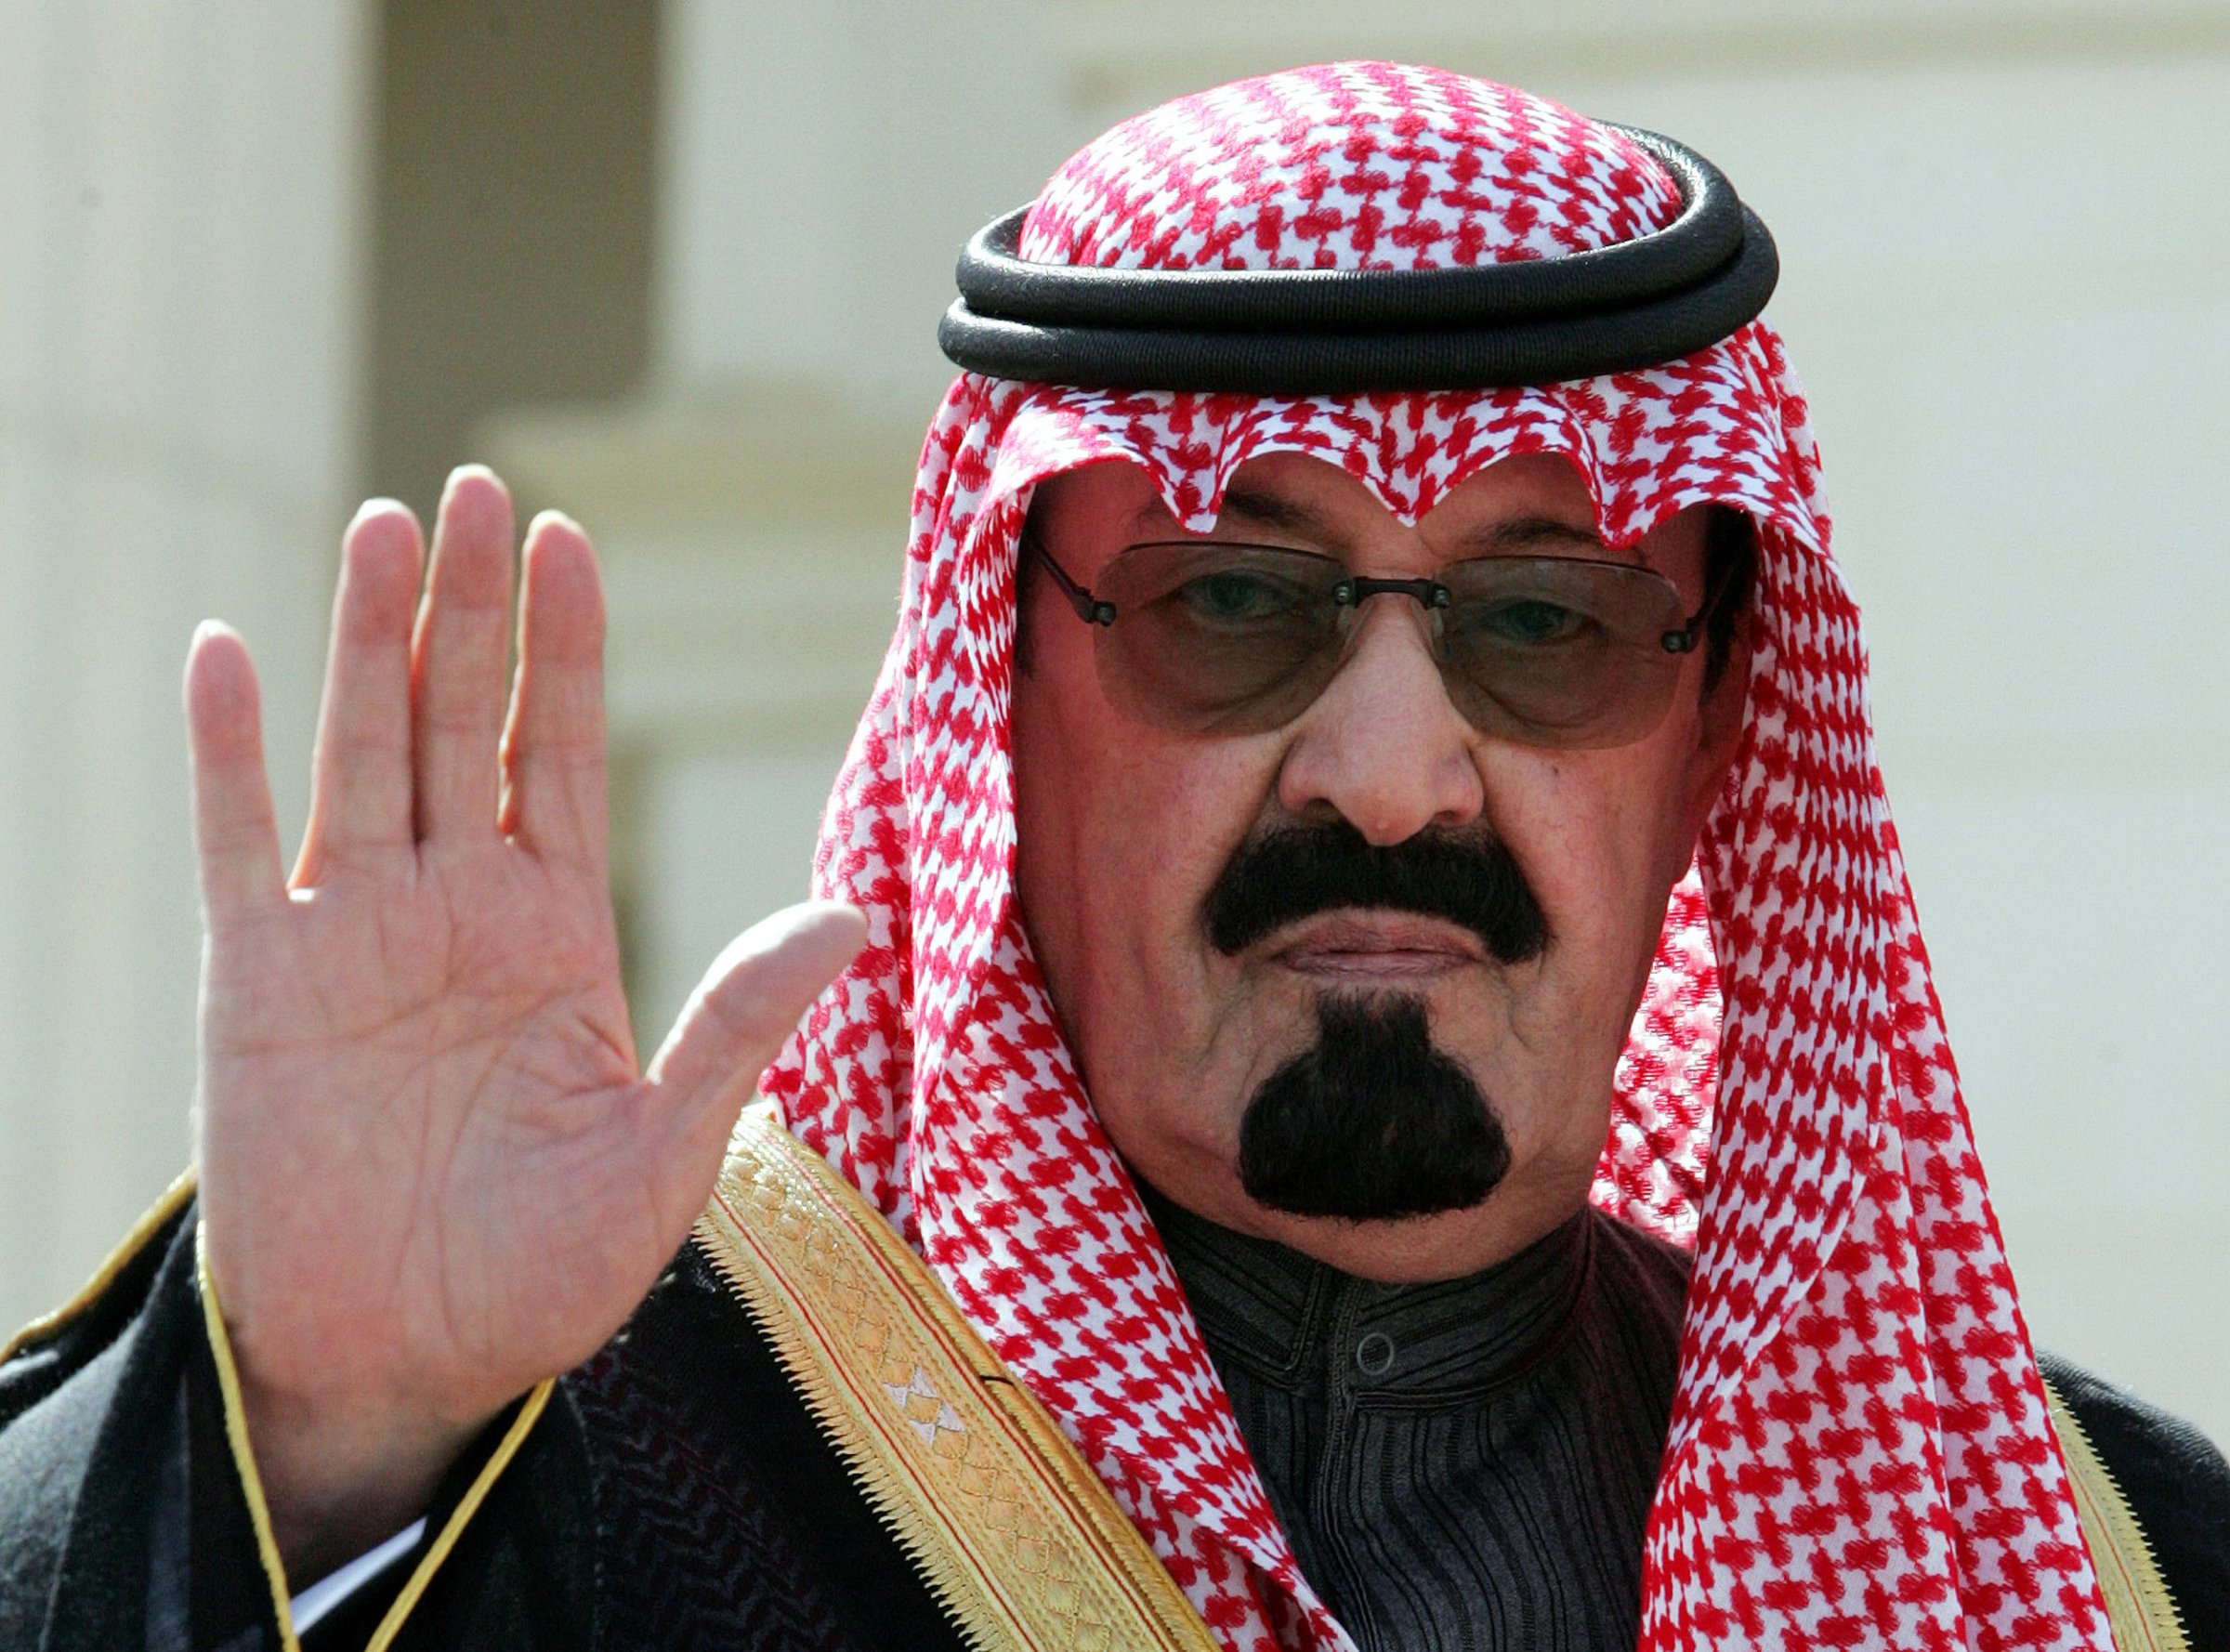 King Abdullah waves as he arrives to open a conference in Riyadh.